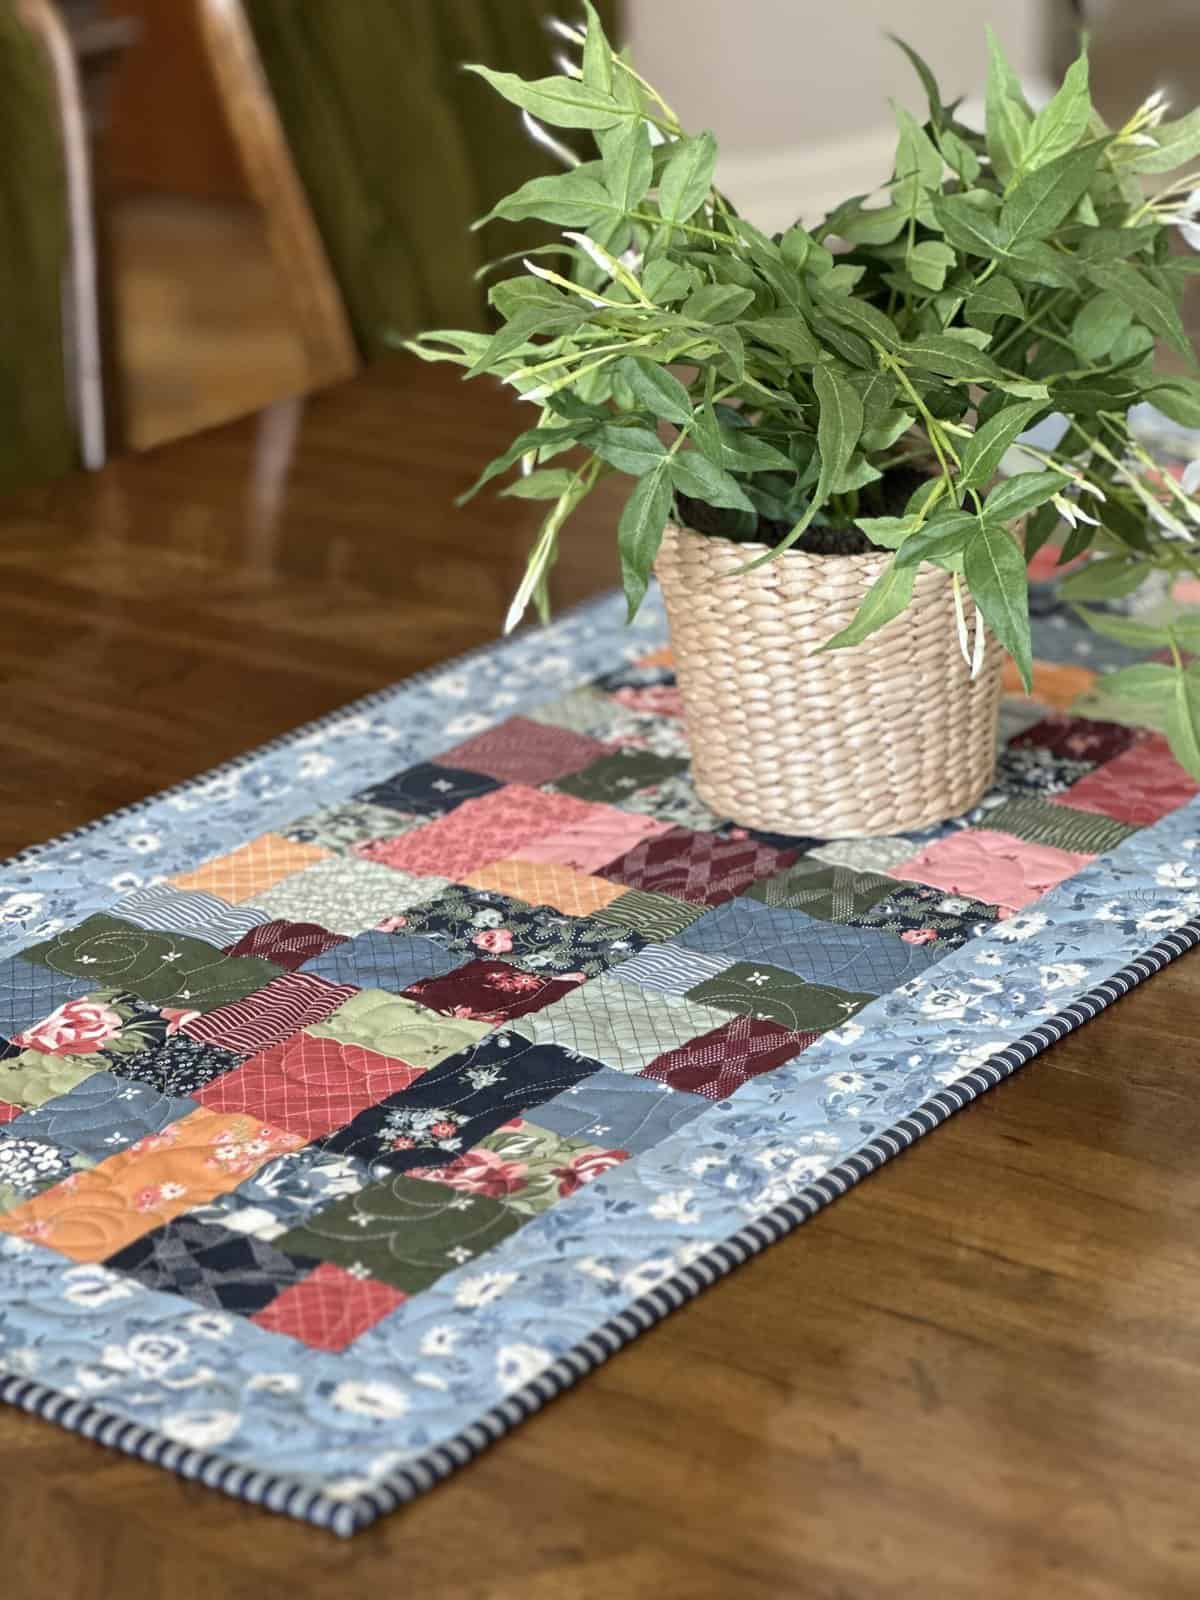 quilted table runner and greenery on a table